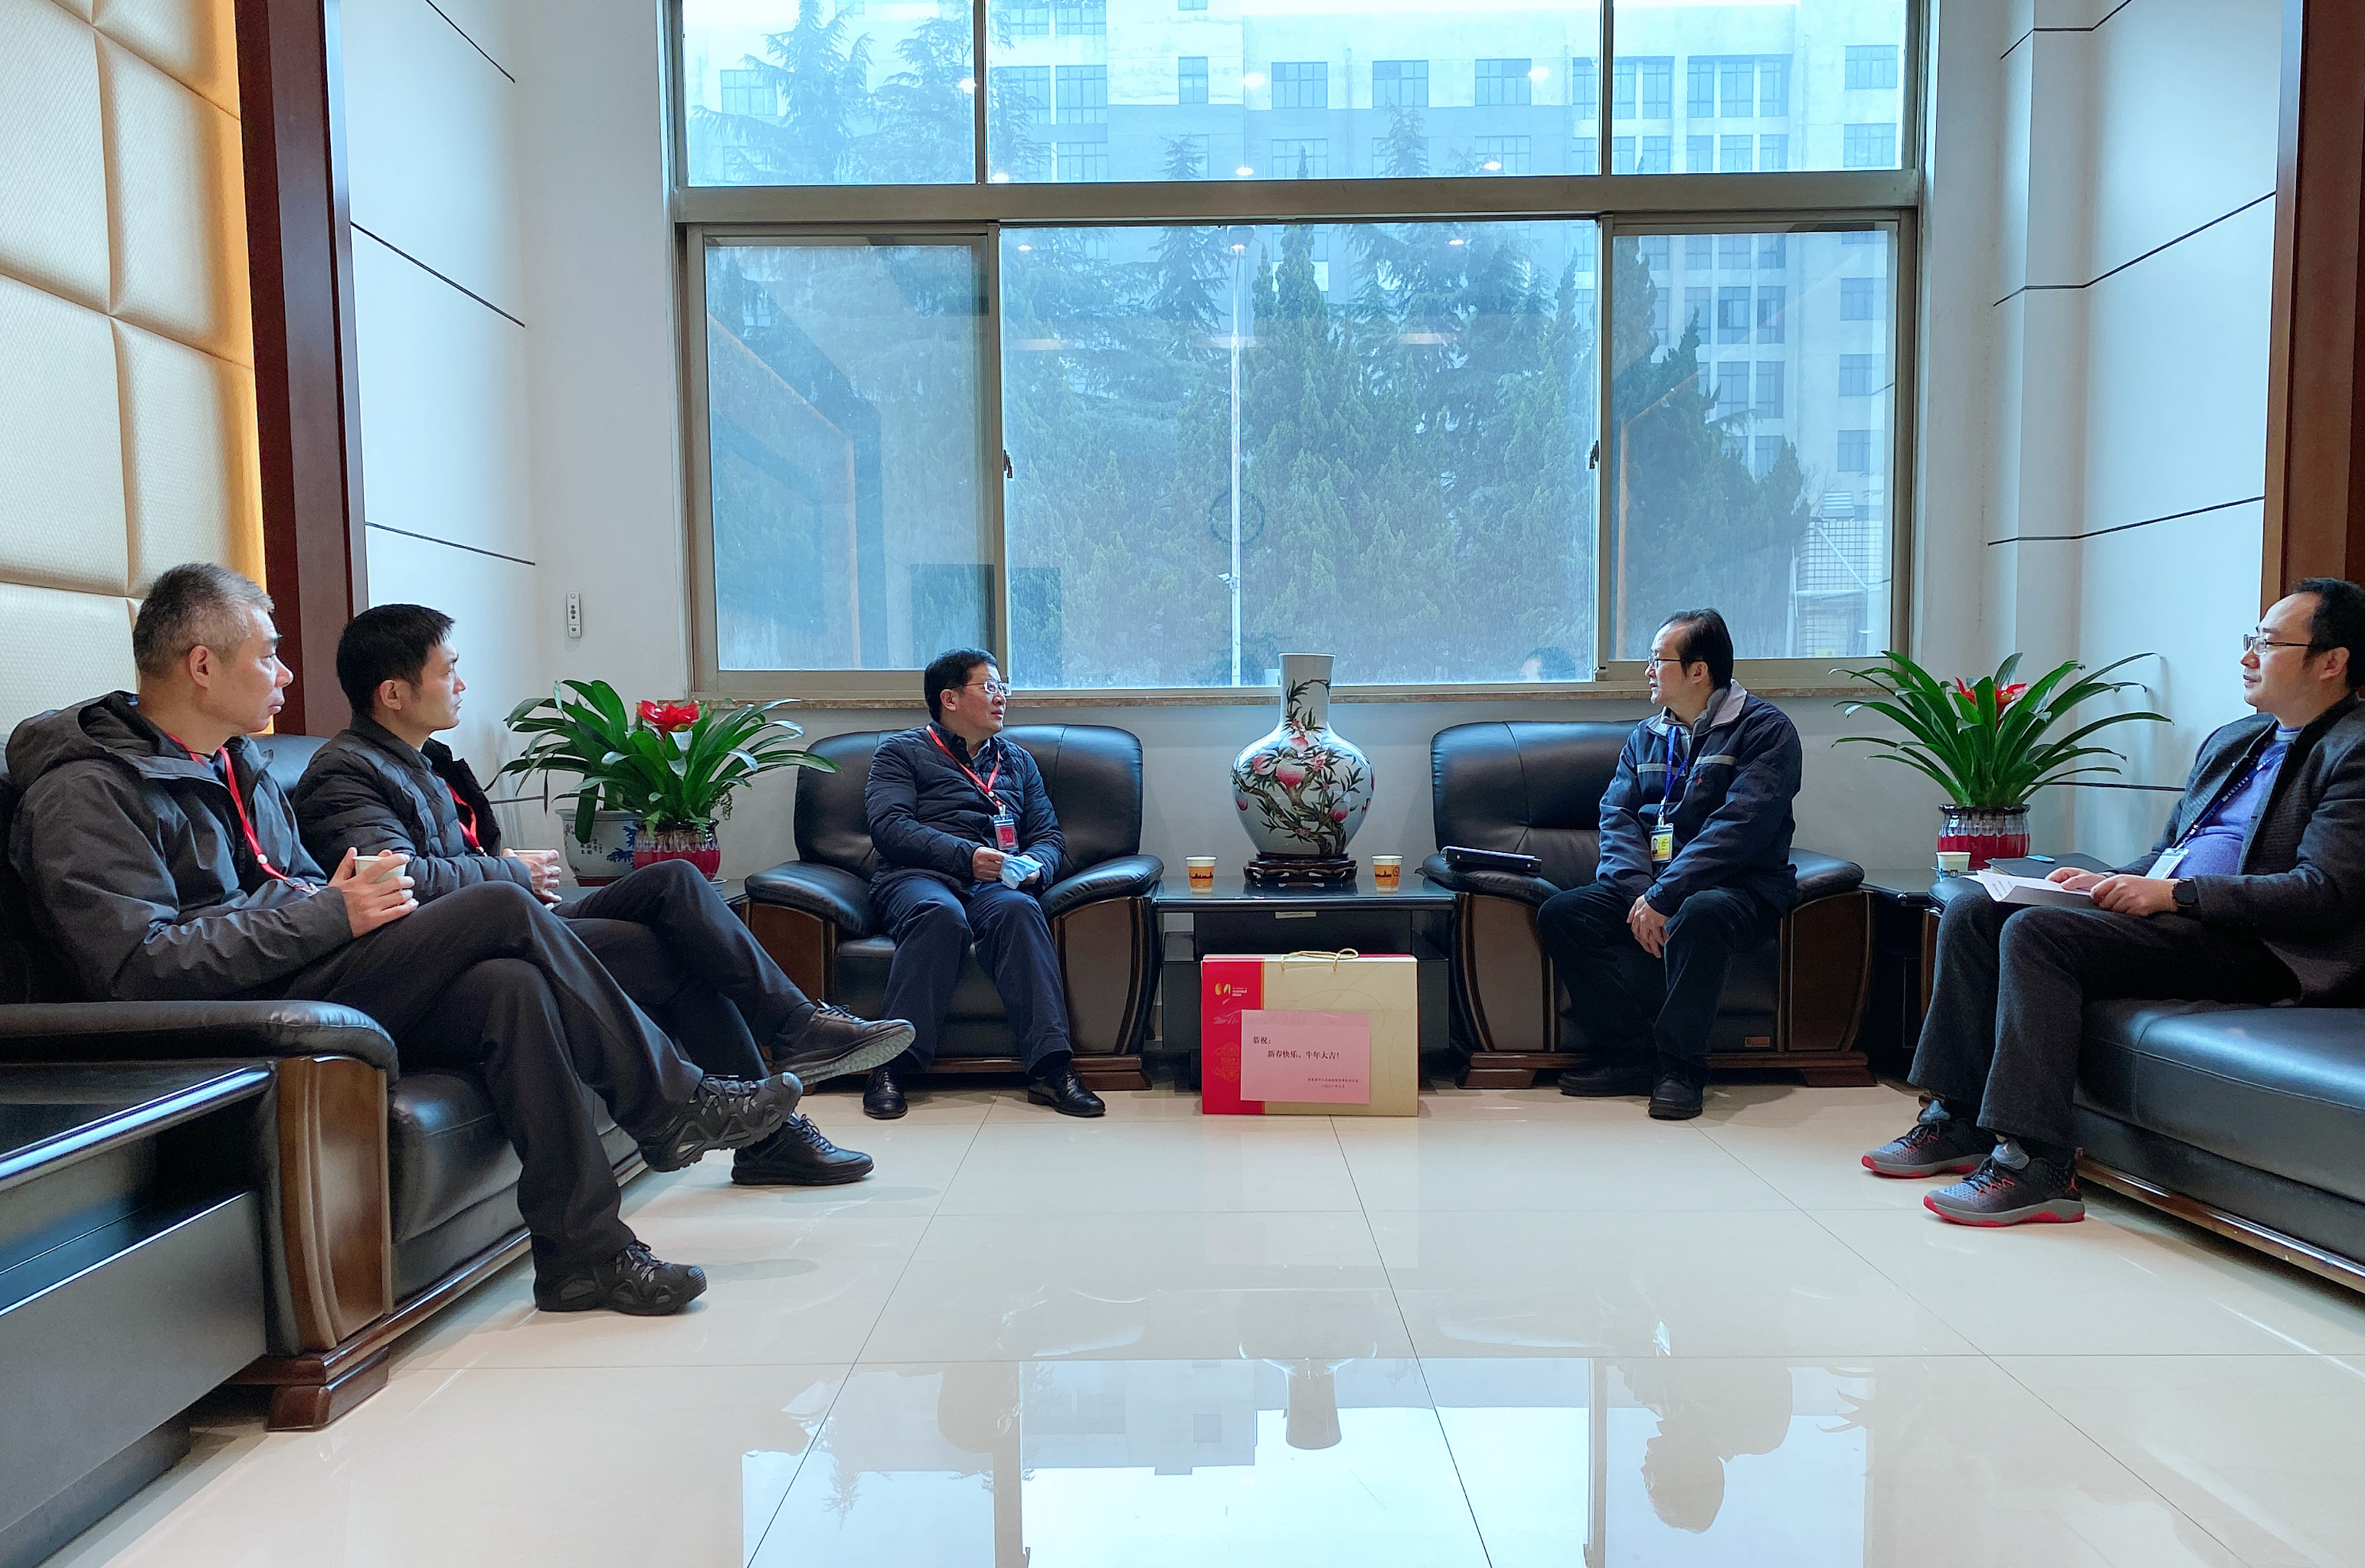 Zhangjiagang City Taiwan Office visited our company in the New Year